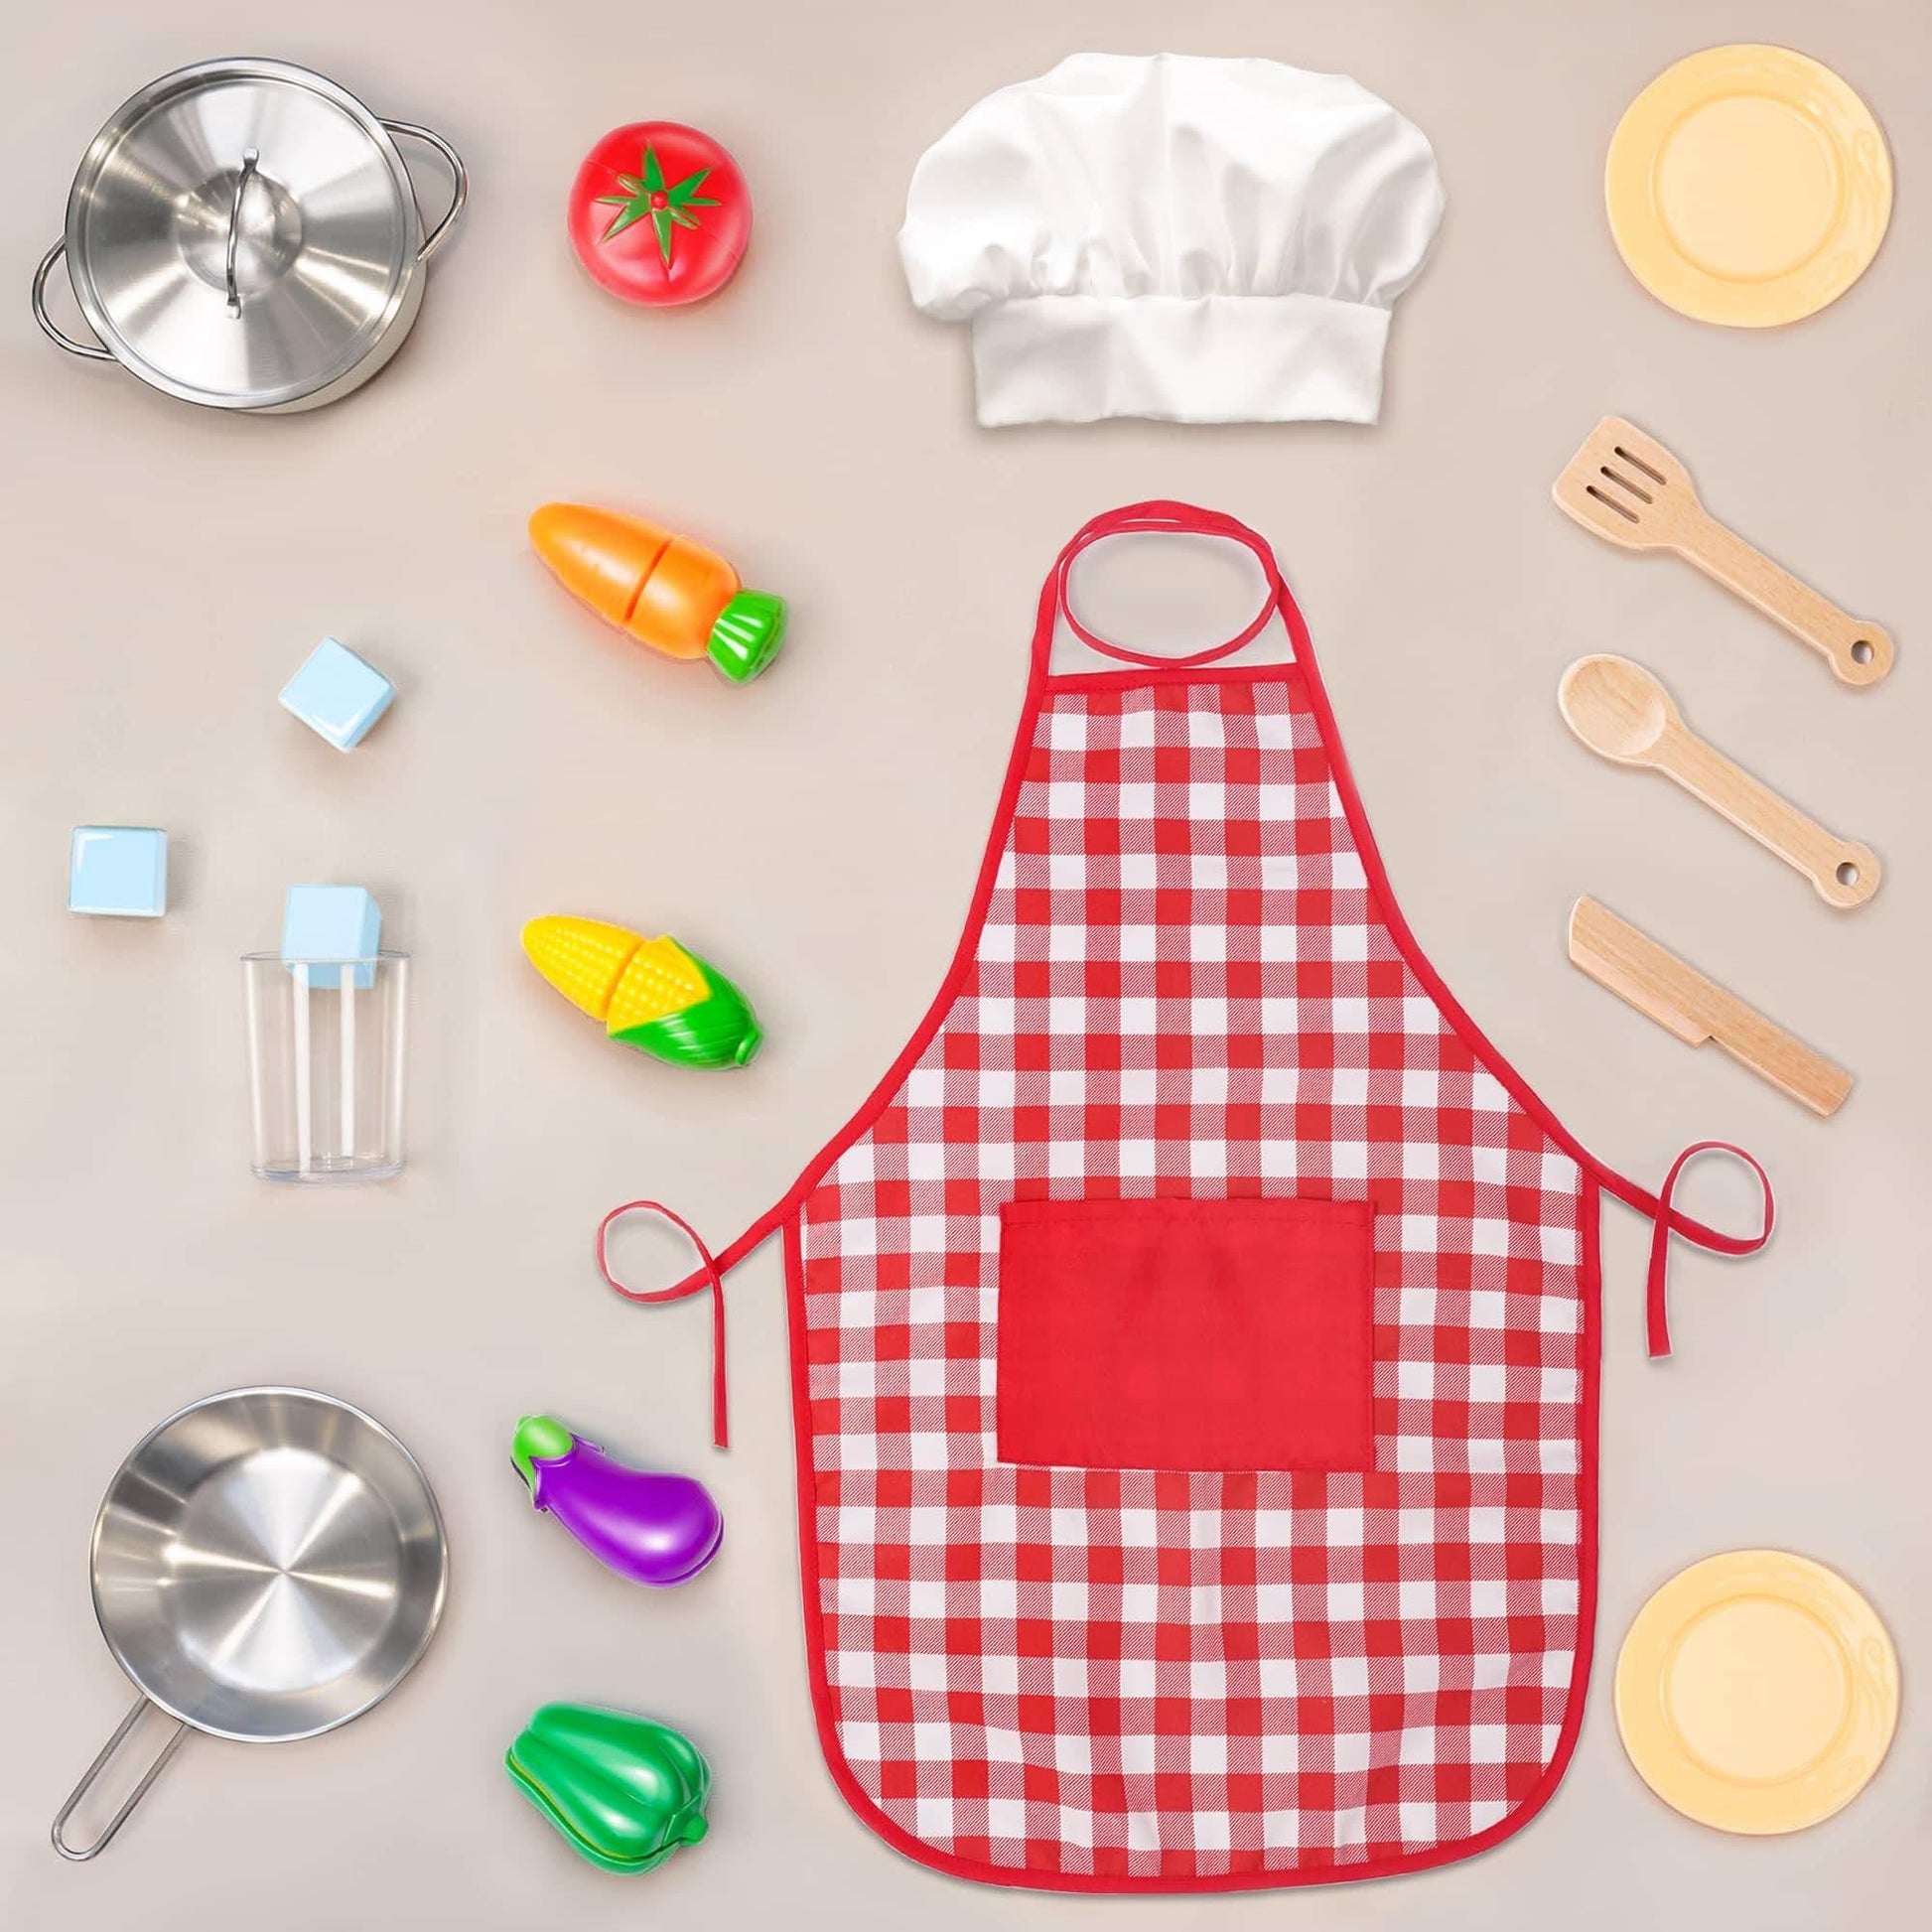 https://www.tinylandus.com/cdn/shop/files/tiny-land-r-play-kitchen-with-18-pcs-toy-food-and-cookware-accessories-tiny-land-6_3ea50778-fe5d-47a0-a9ae-f4de556bcca0.jpg?v=1690784449&width=1946